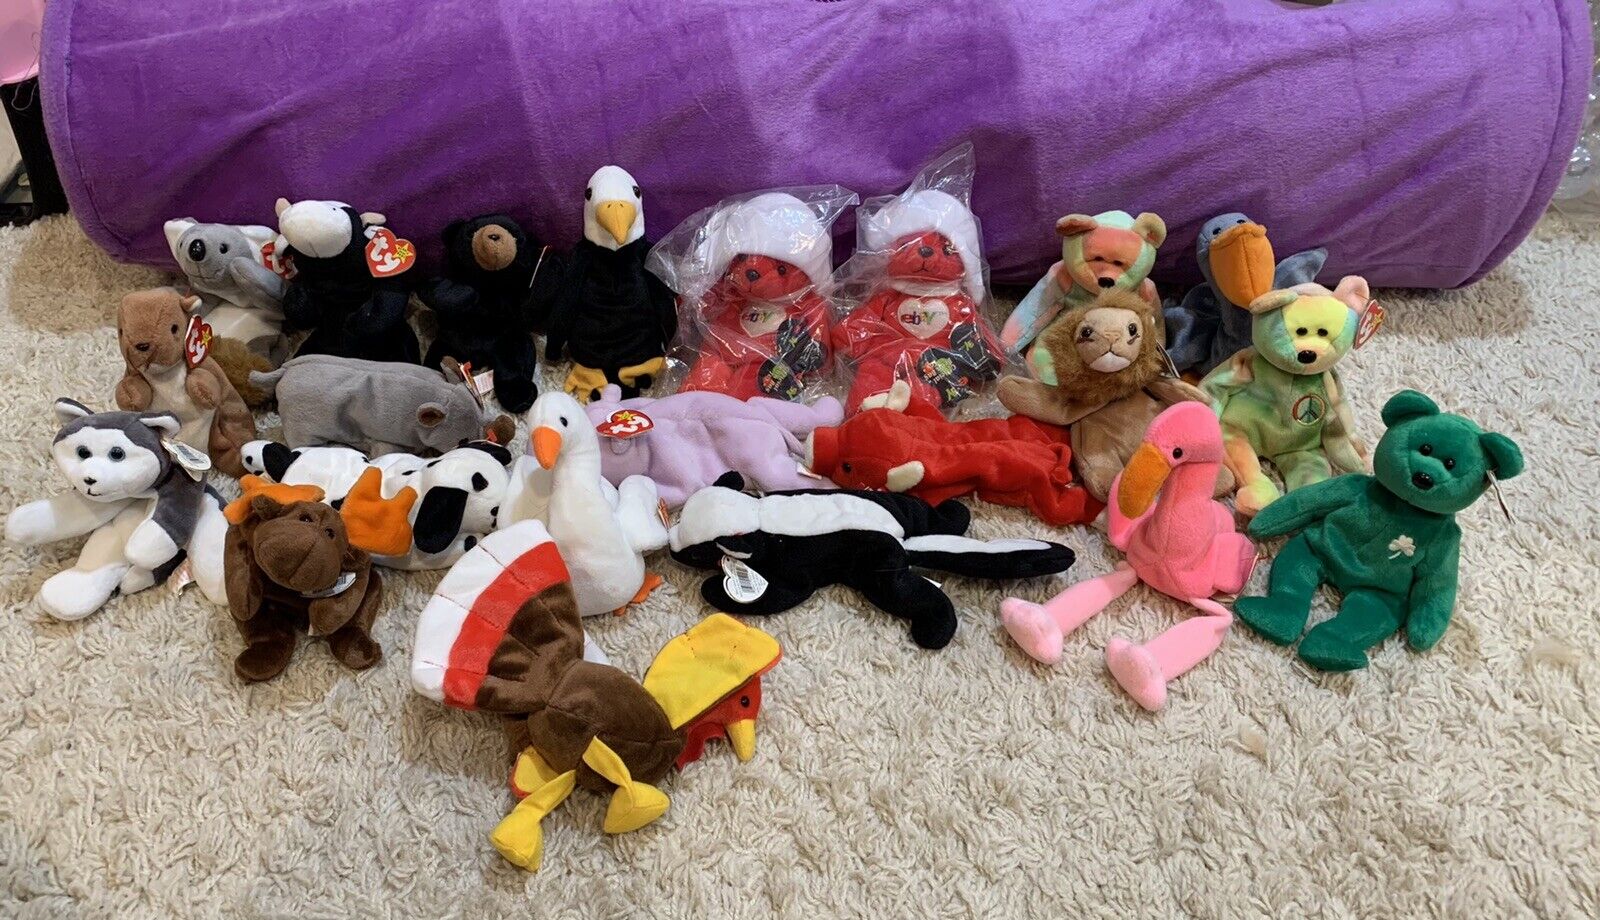 Fashionable Beanie Babies Free shipping anywhere in the nation lot of 22 from 1993-1997 vintage all retired